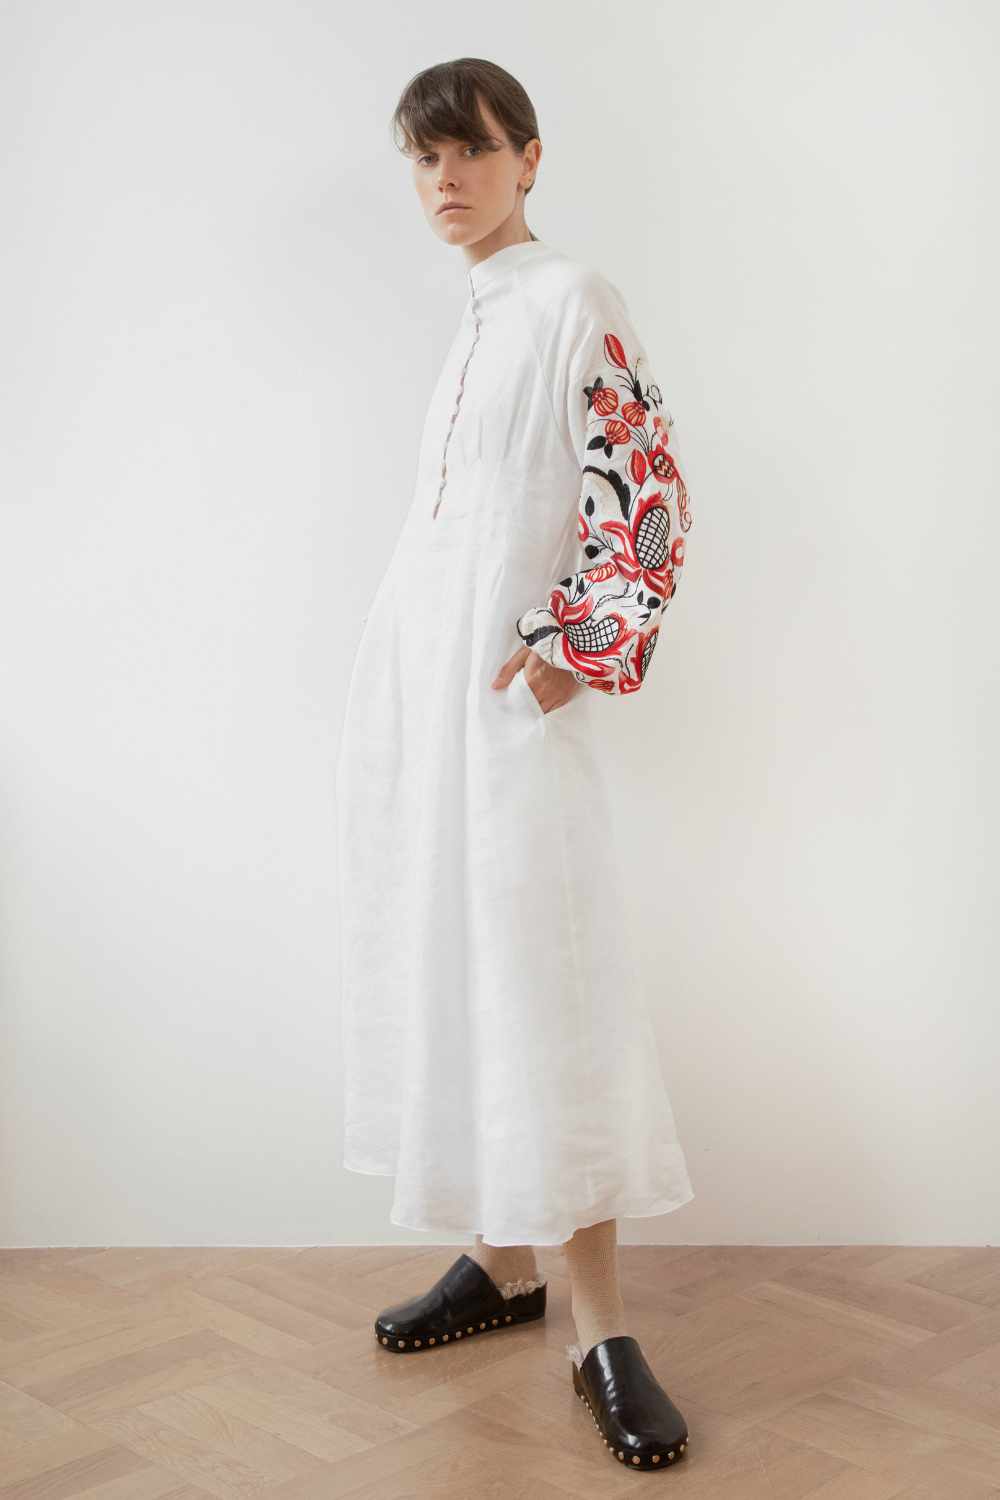 Pomegranate dress with &quot;Colorful ornament&quot; made of white linen (Gaptuvalnya)